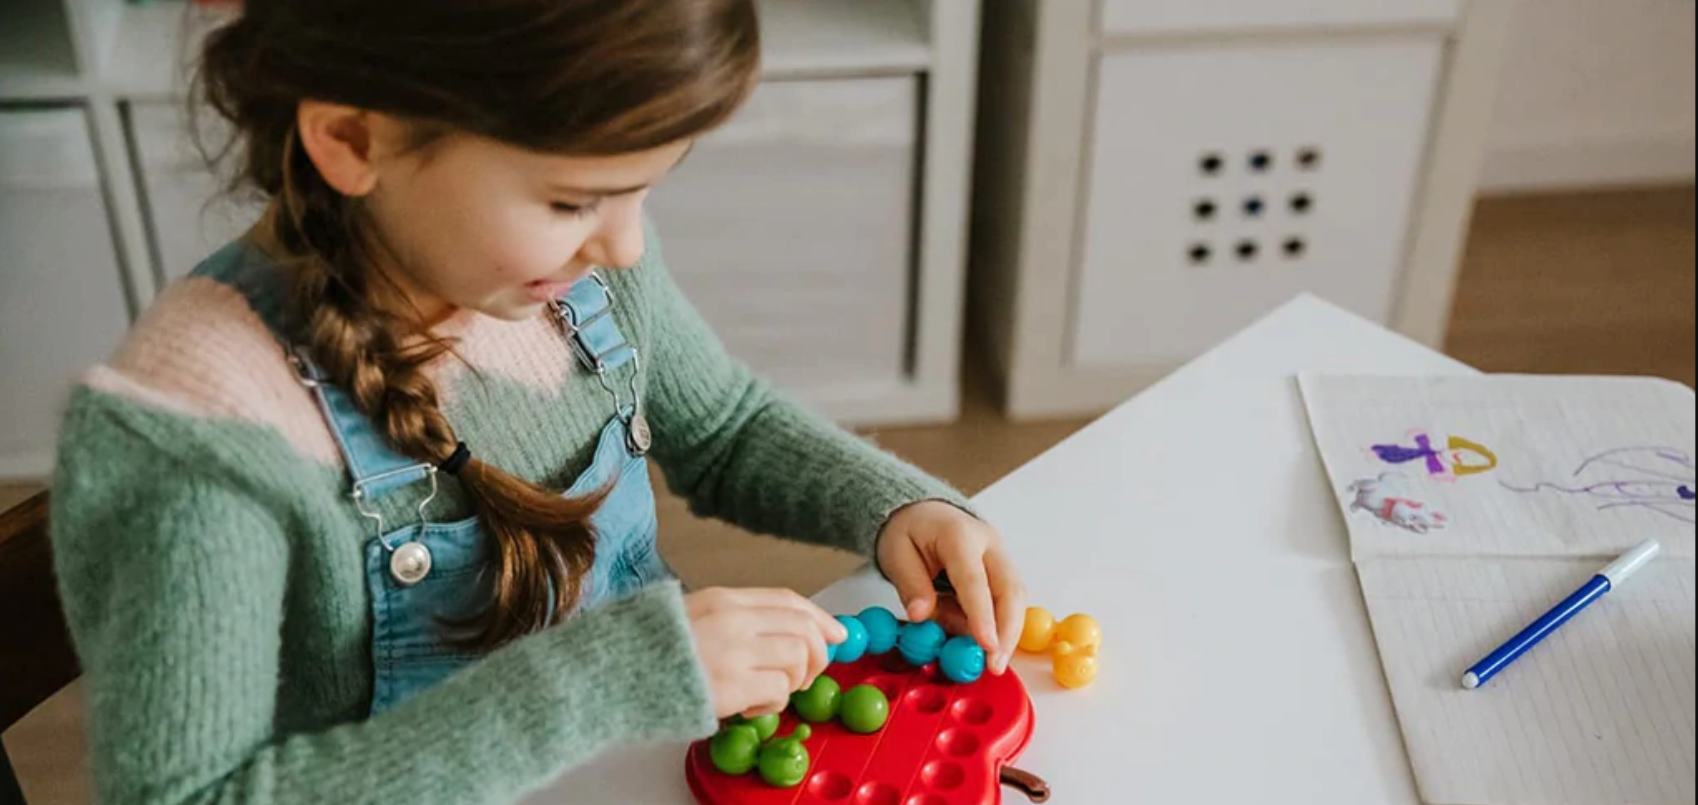 We Got Experts To Review The 20 Best STEM Toys For Kids (2022)